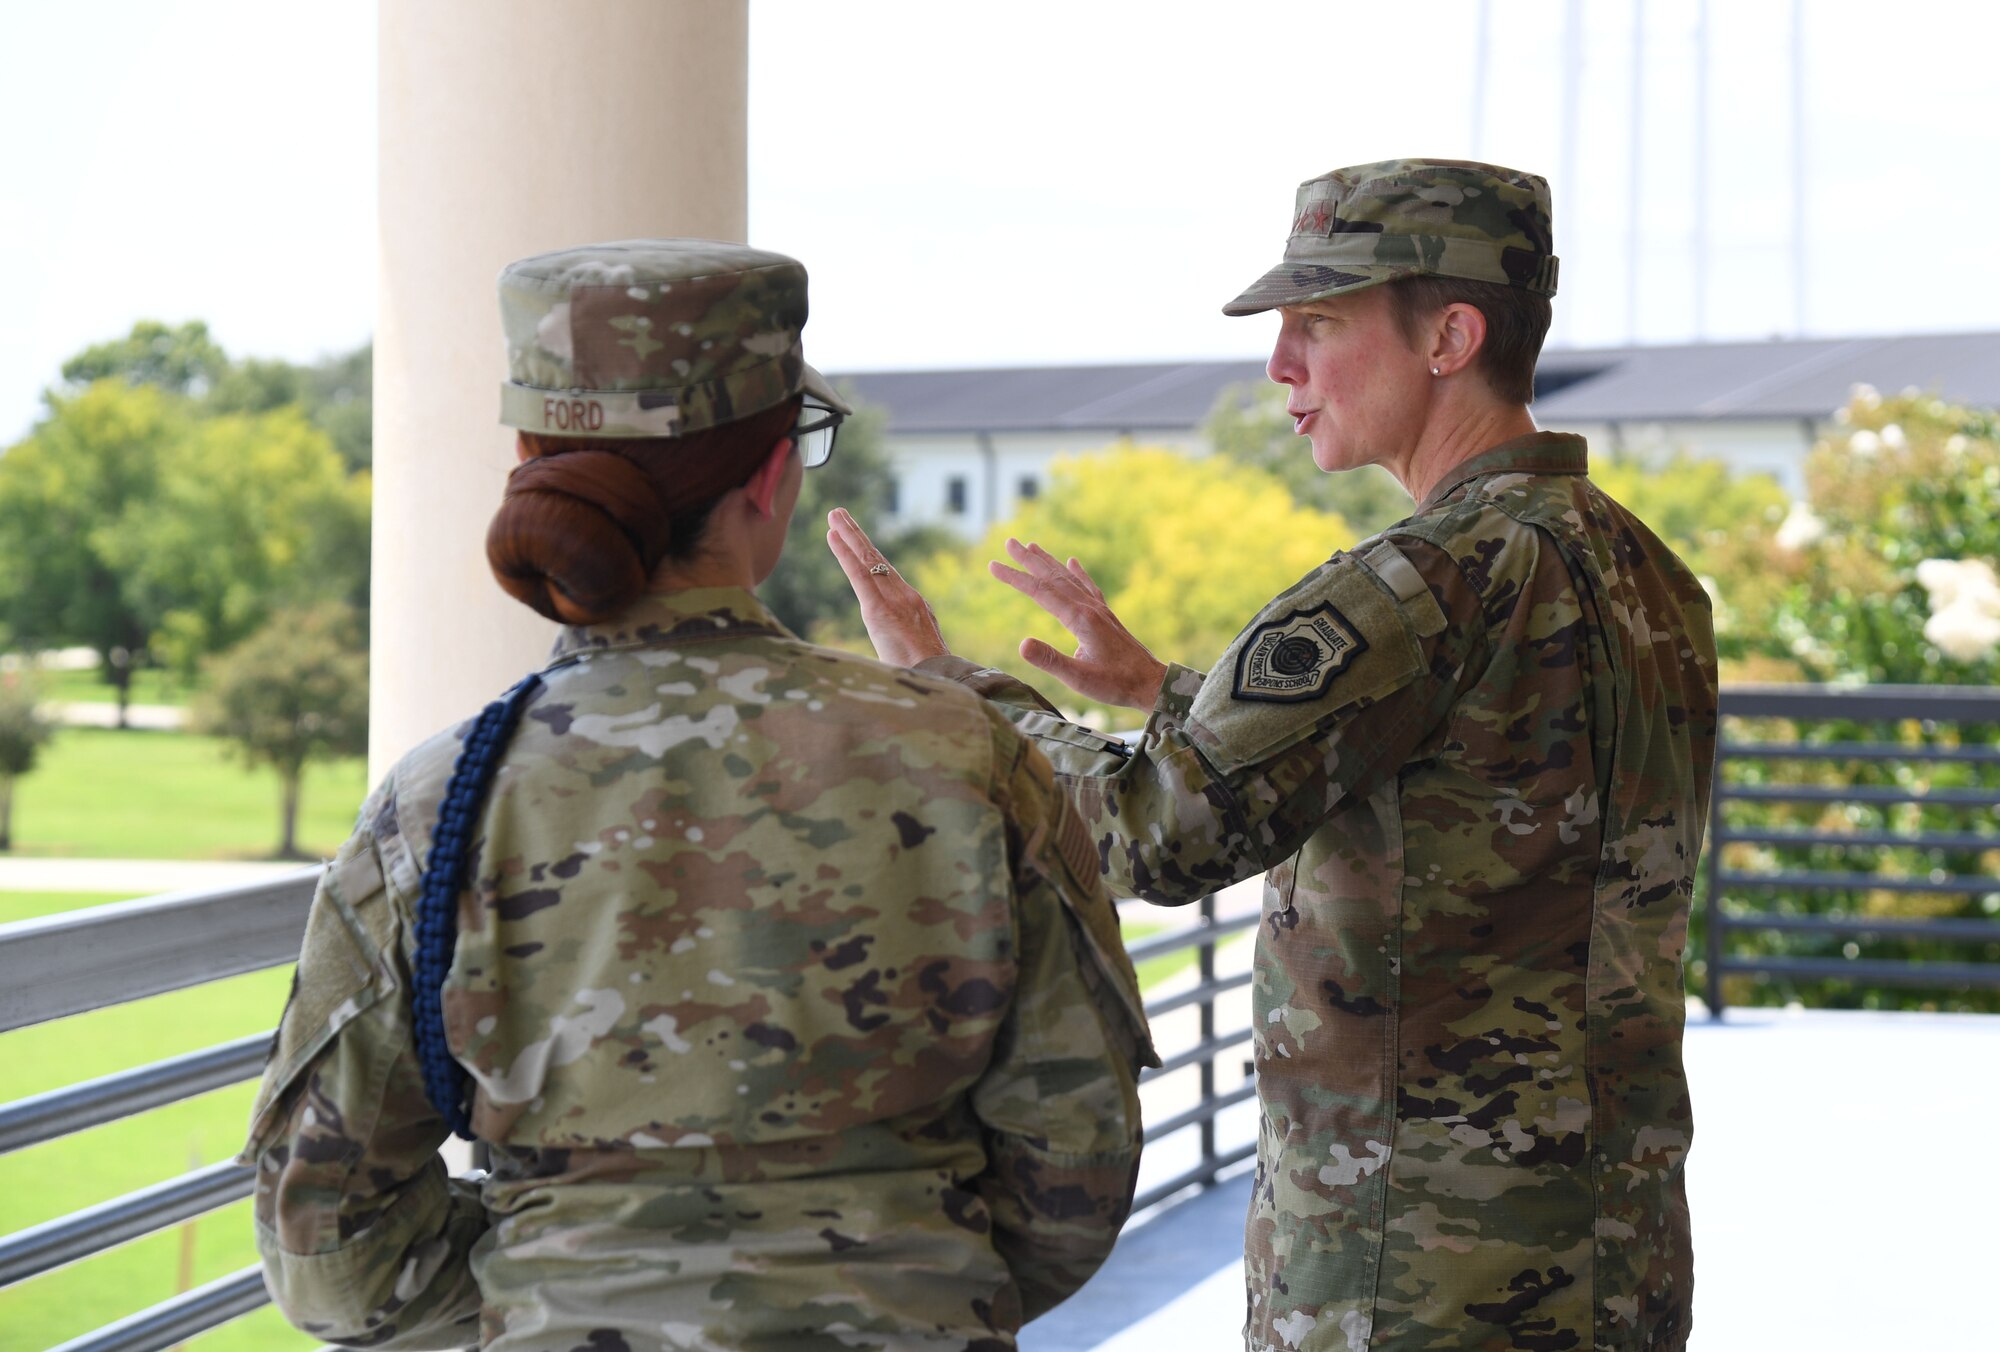 U.S. Air Force Tech. Sgt. Megan Ford, 81st Training Group military training leader, provides an overview of the dorm area to Lt. Gen. Leah Lauderback, Deputy Chief of Staff for Intelligence, Surveillance, Reconnaissance and Cyber Effects Operations, Headquarters U.S. Air Force, the Pentagon, Arlington, Virginia, on the balcony of the Levitow Training Support Facility at Keesler Air Force Base, Mississippi, August 15, 2022. Lauderback and her team also toured the 333rd Training Squadron and 336th Training Squadron to meet and greet squadron personnel, understand the squadron's mission and be briefed on new innovations. (U.S. Air Force photo by Kemberly Groue)